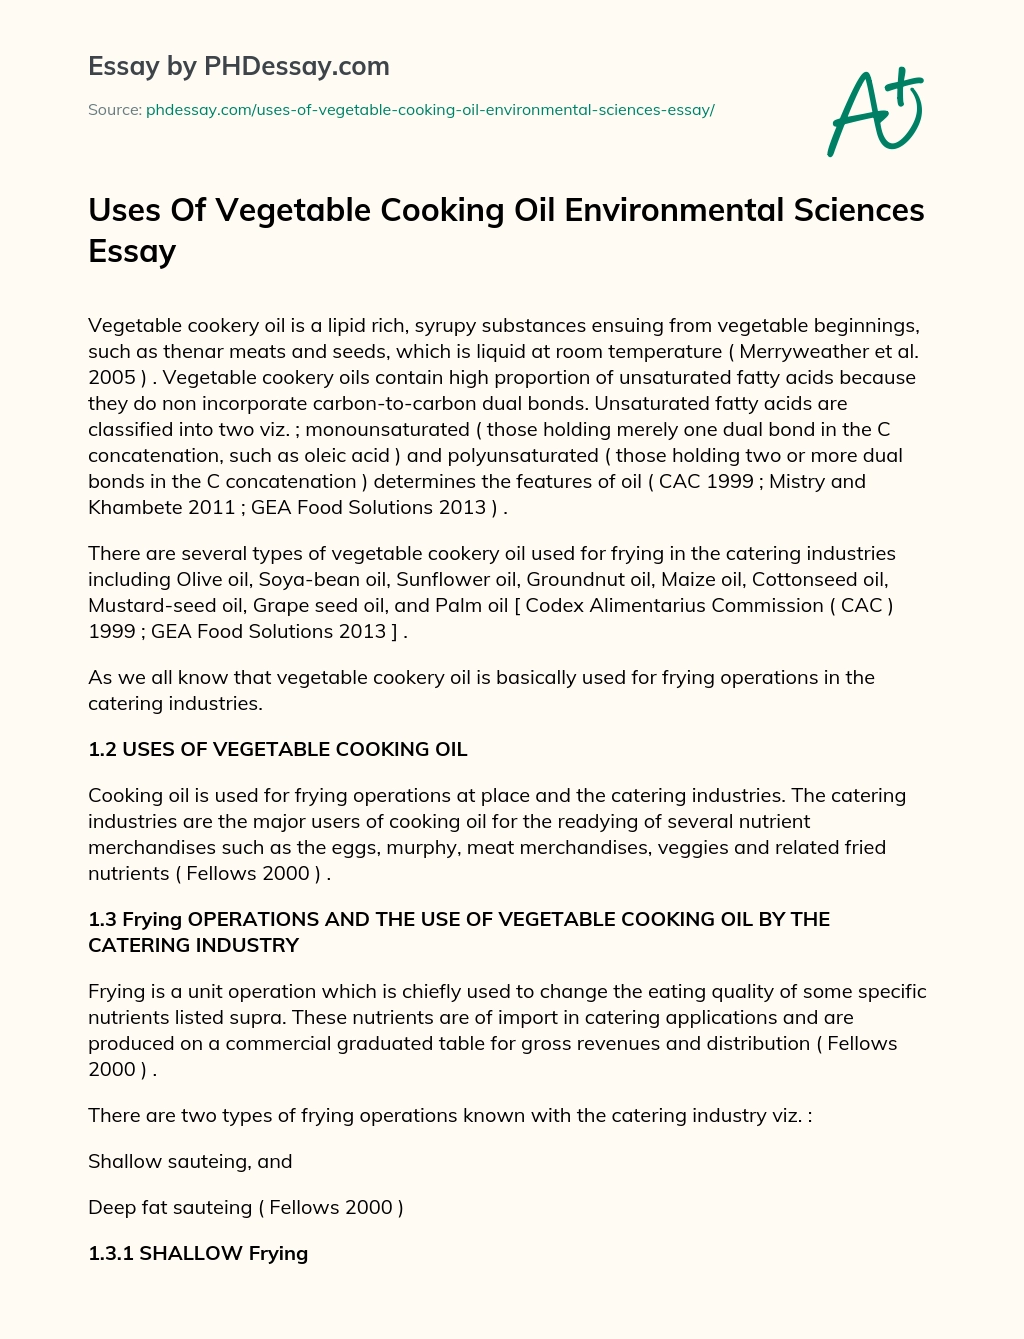 Uses Of Vegetable Cooking Oil Environmental Sciences Essay essay